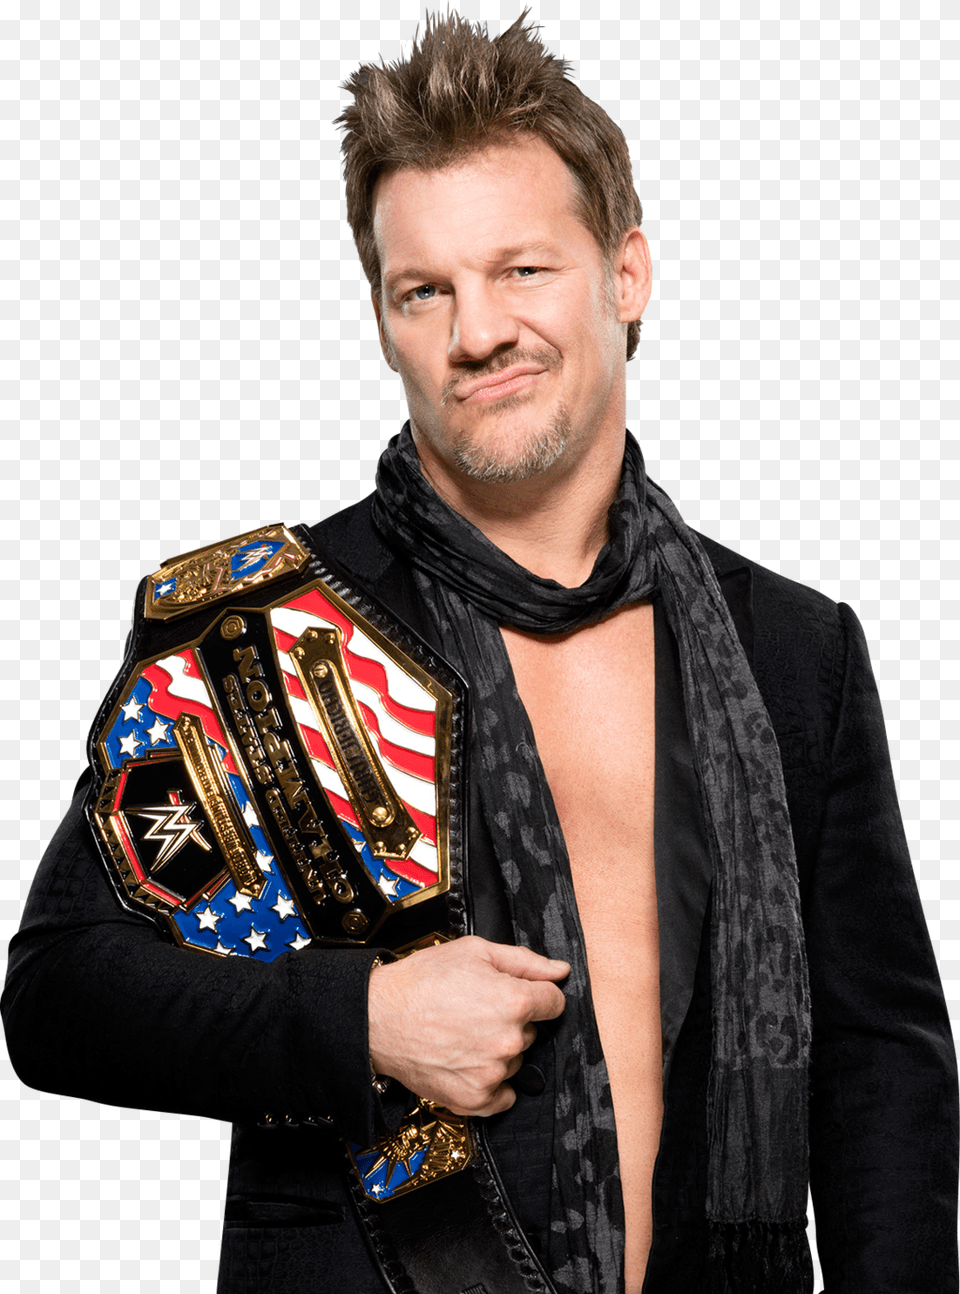 Chris Jericho United States Champion, Accessories, Clothing, Coat, Jacket Png